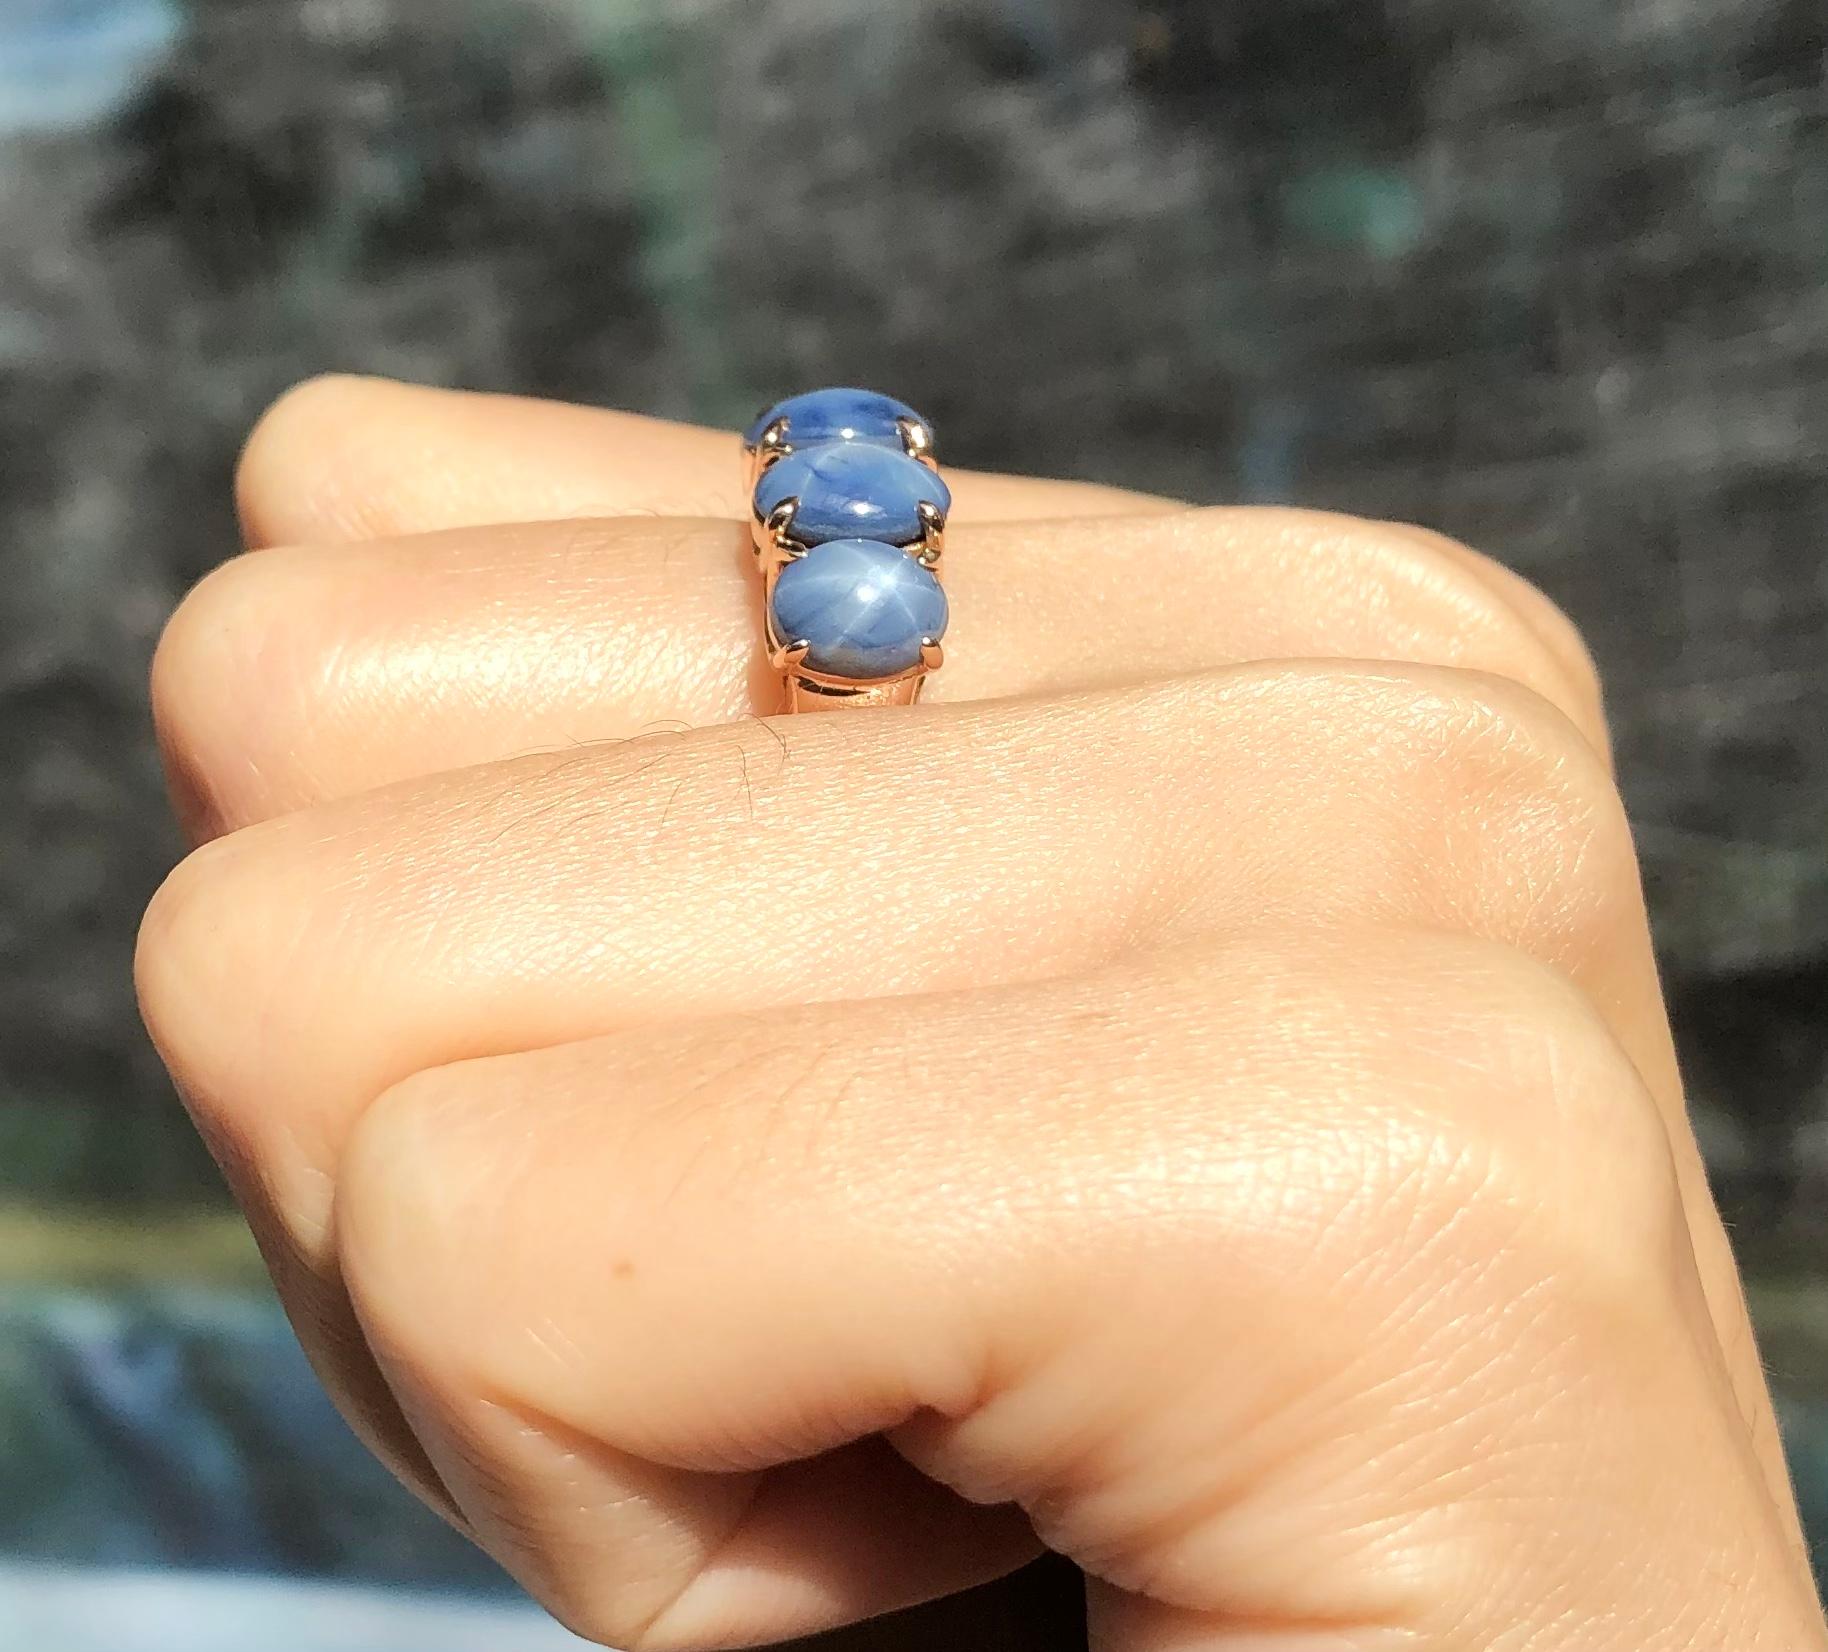 Blue Star Sapphire 6.19 carats Ring set in 18 Karat Rose Gold Settings

Width:  2.2 cm 
Length: 0.3 cm
Ring Size: 53
Total Weight: 7.68 grams

